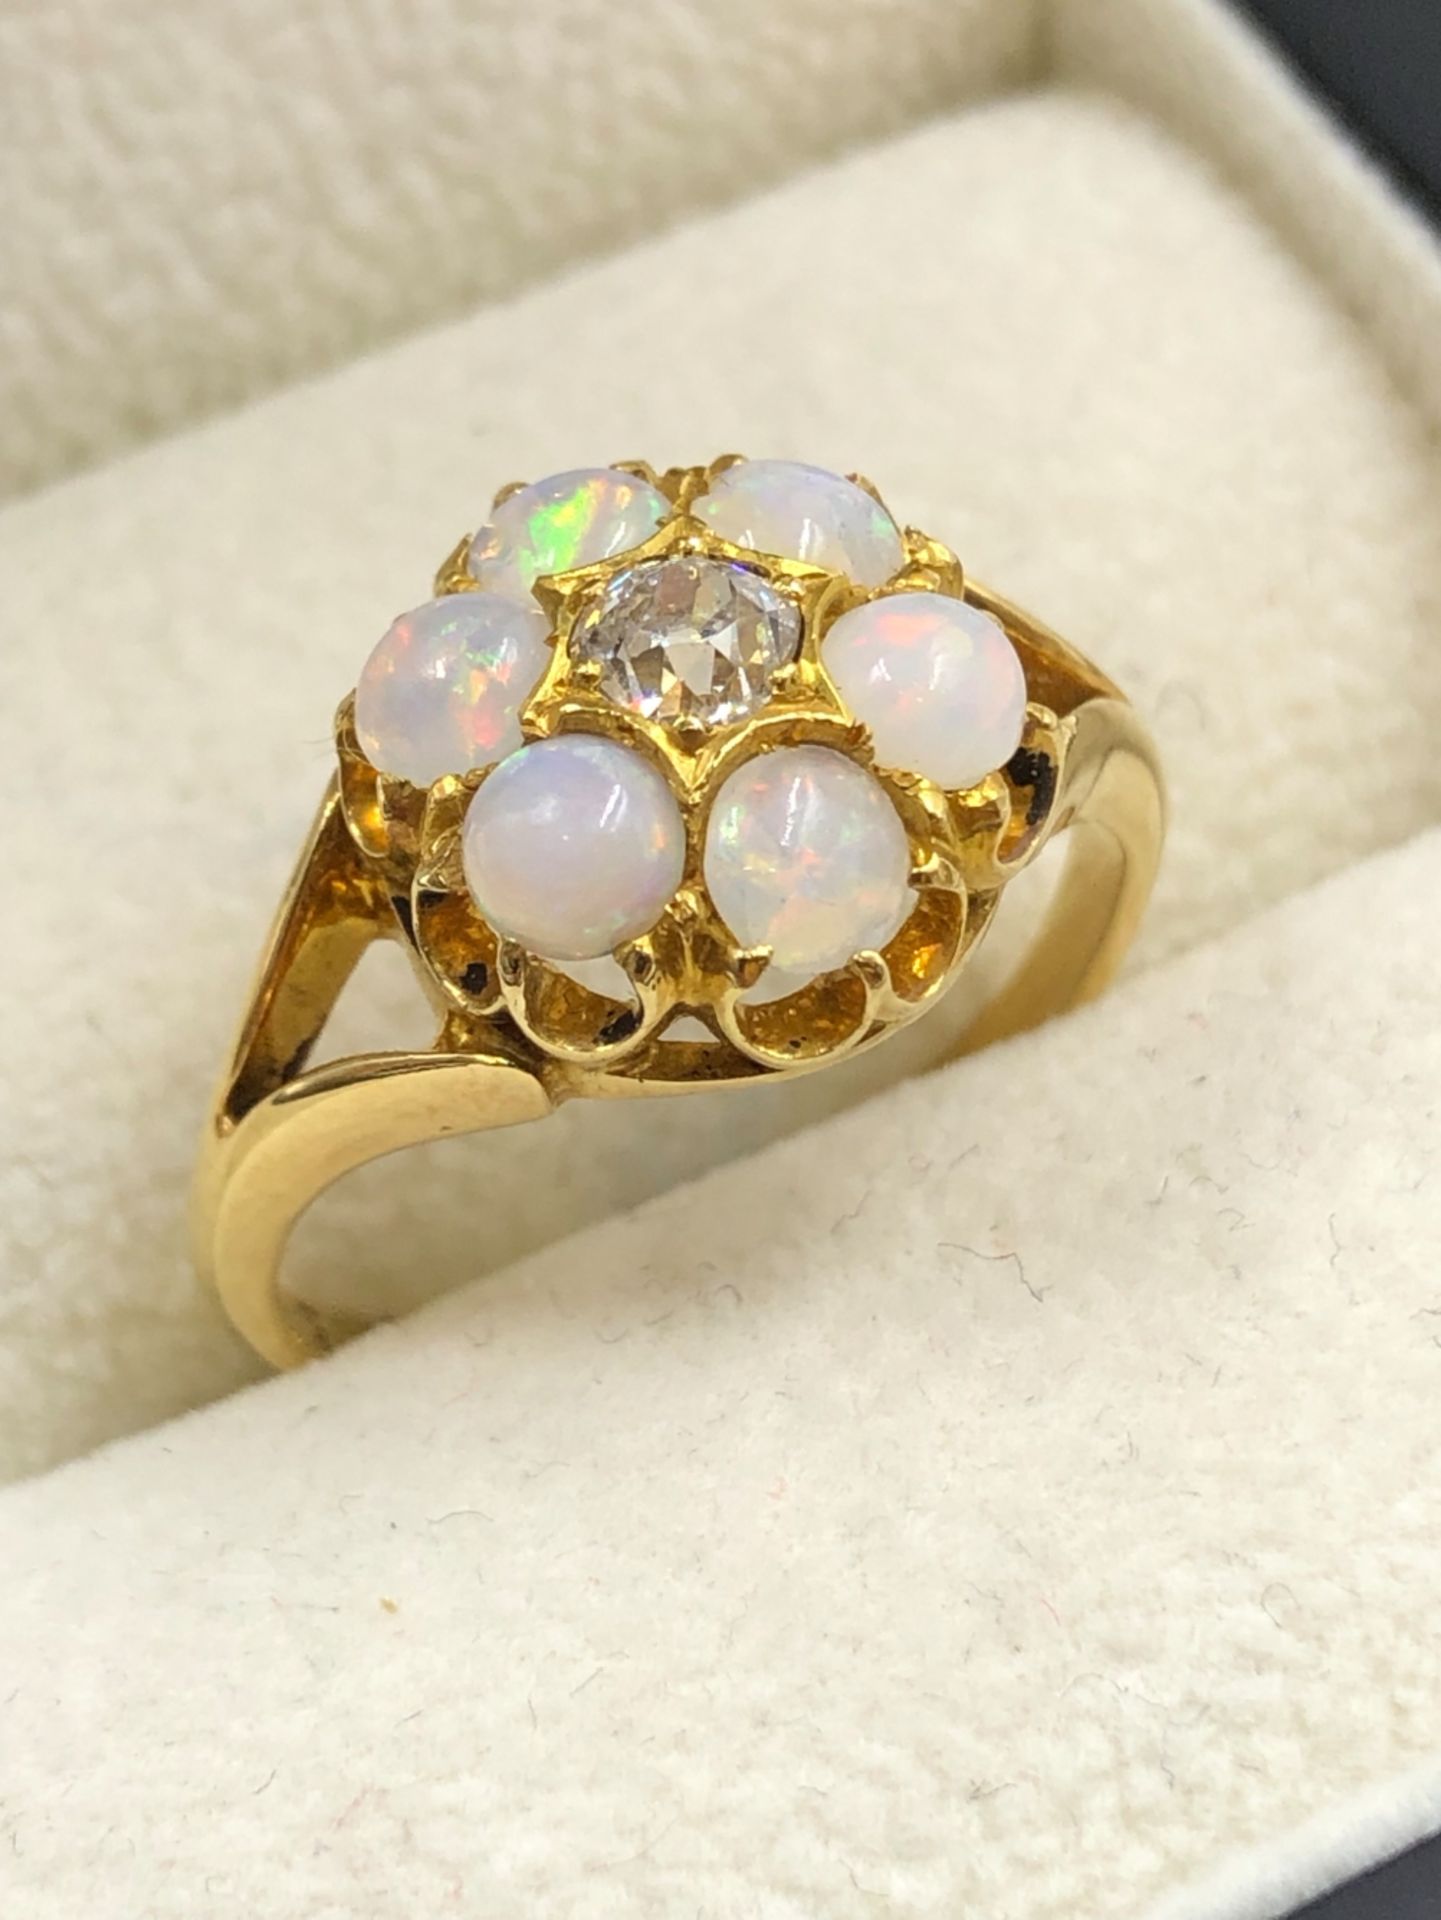 AN EARLY 20th CENTURY OLD CUT DIAMOND AND OPAL SEVEN STONE CLUSTER RING, THE SHANK STAMPED 18ct, - Image 2 of 4